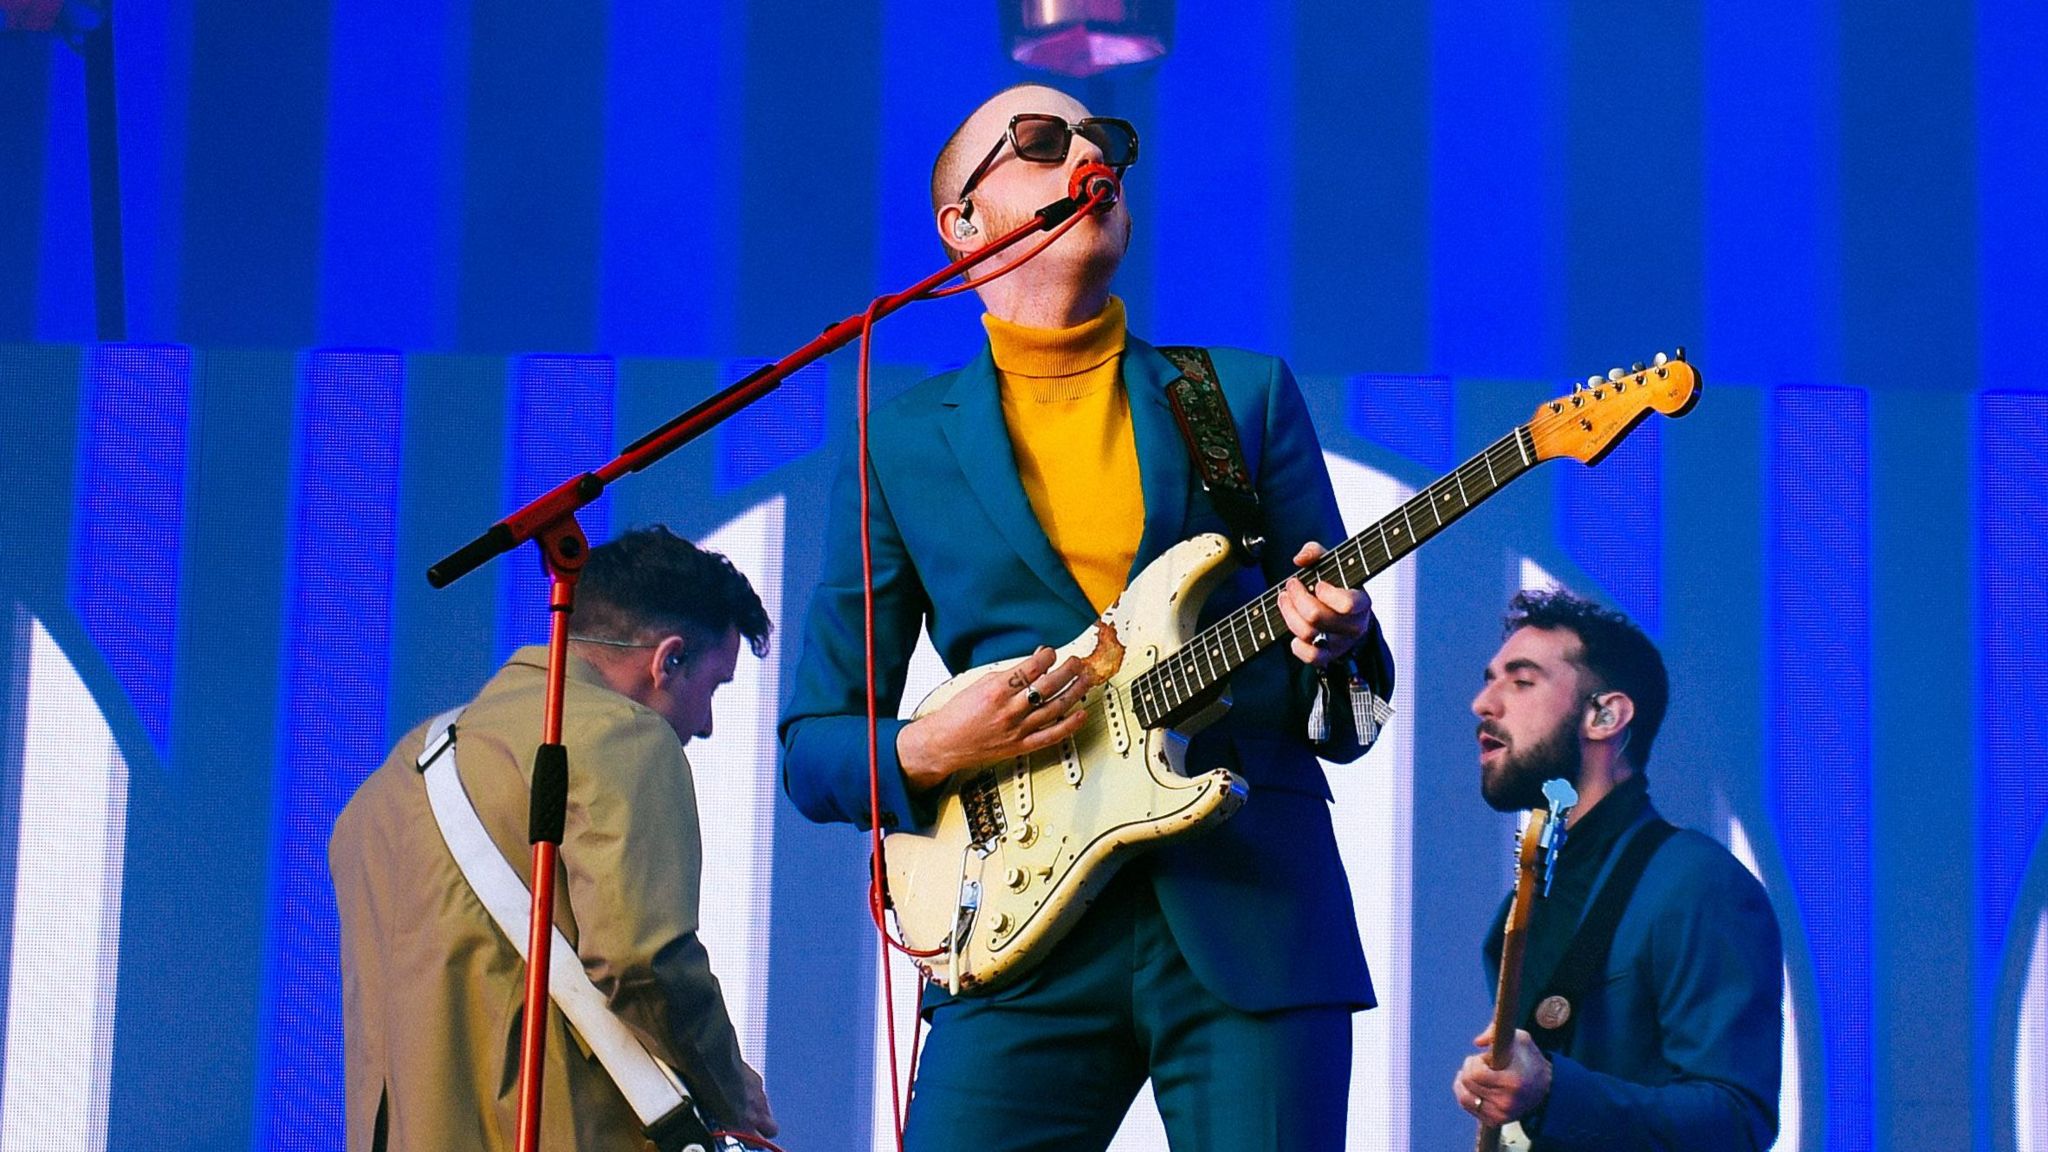 Two Door Cinema Club performing. Lead singer Alex Trimble is playing guitar and singing into a microphone.